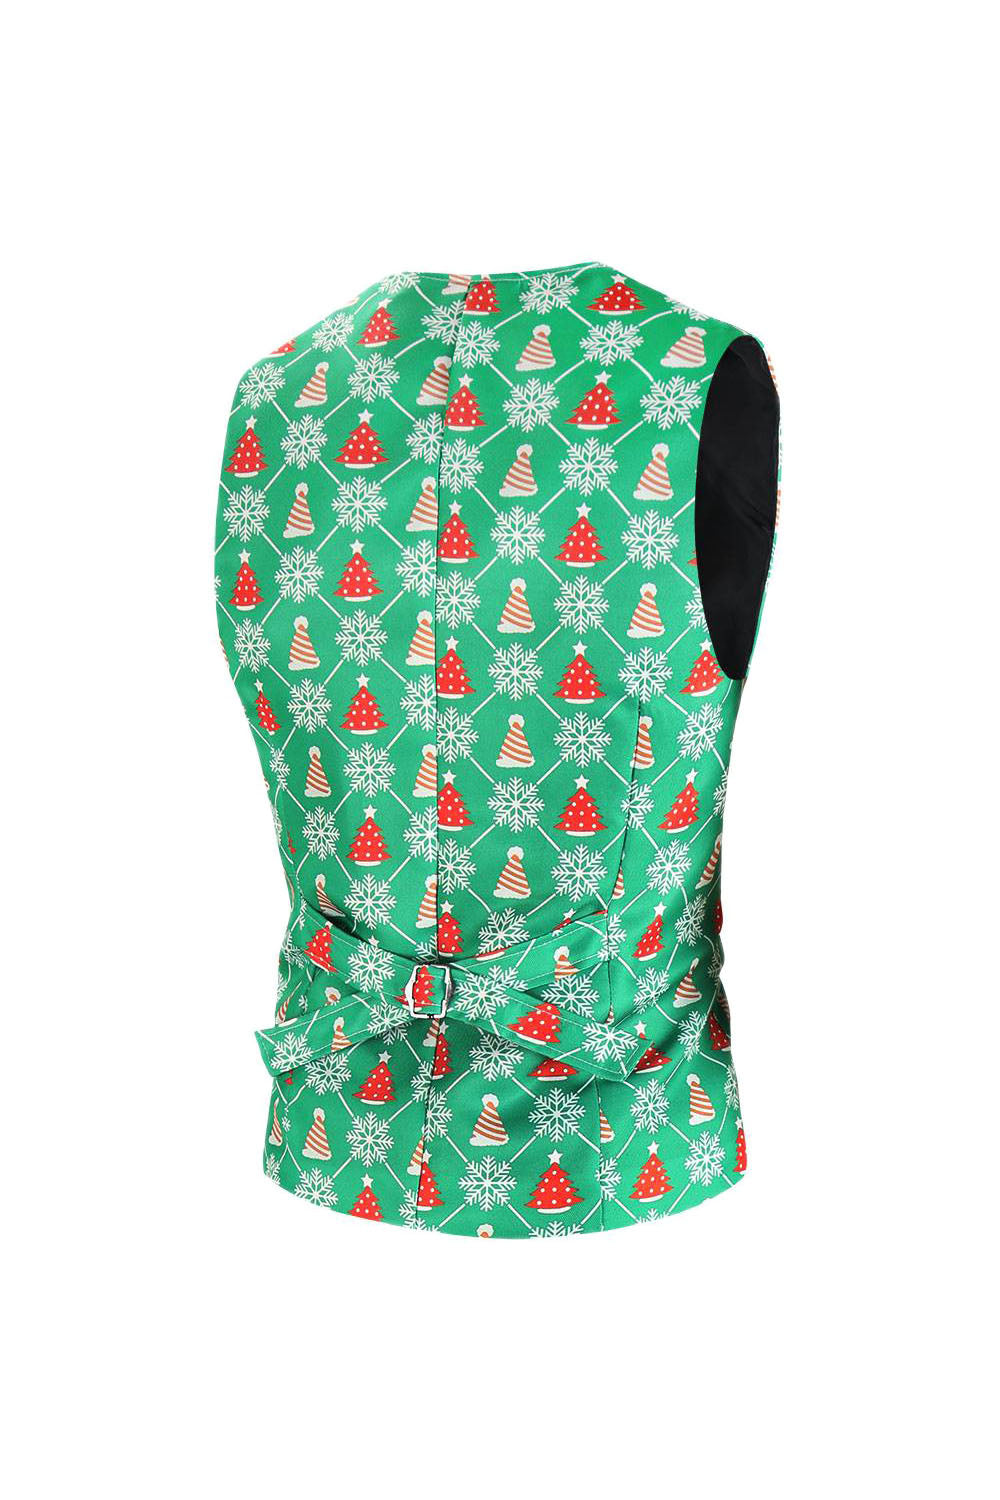 Green Christmas Tree Printed 3 Piece Men's Suits